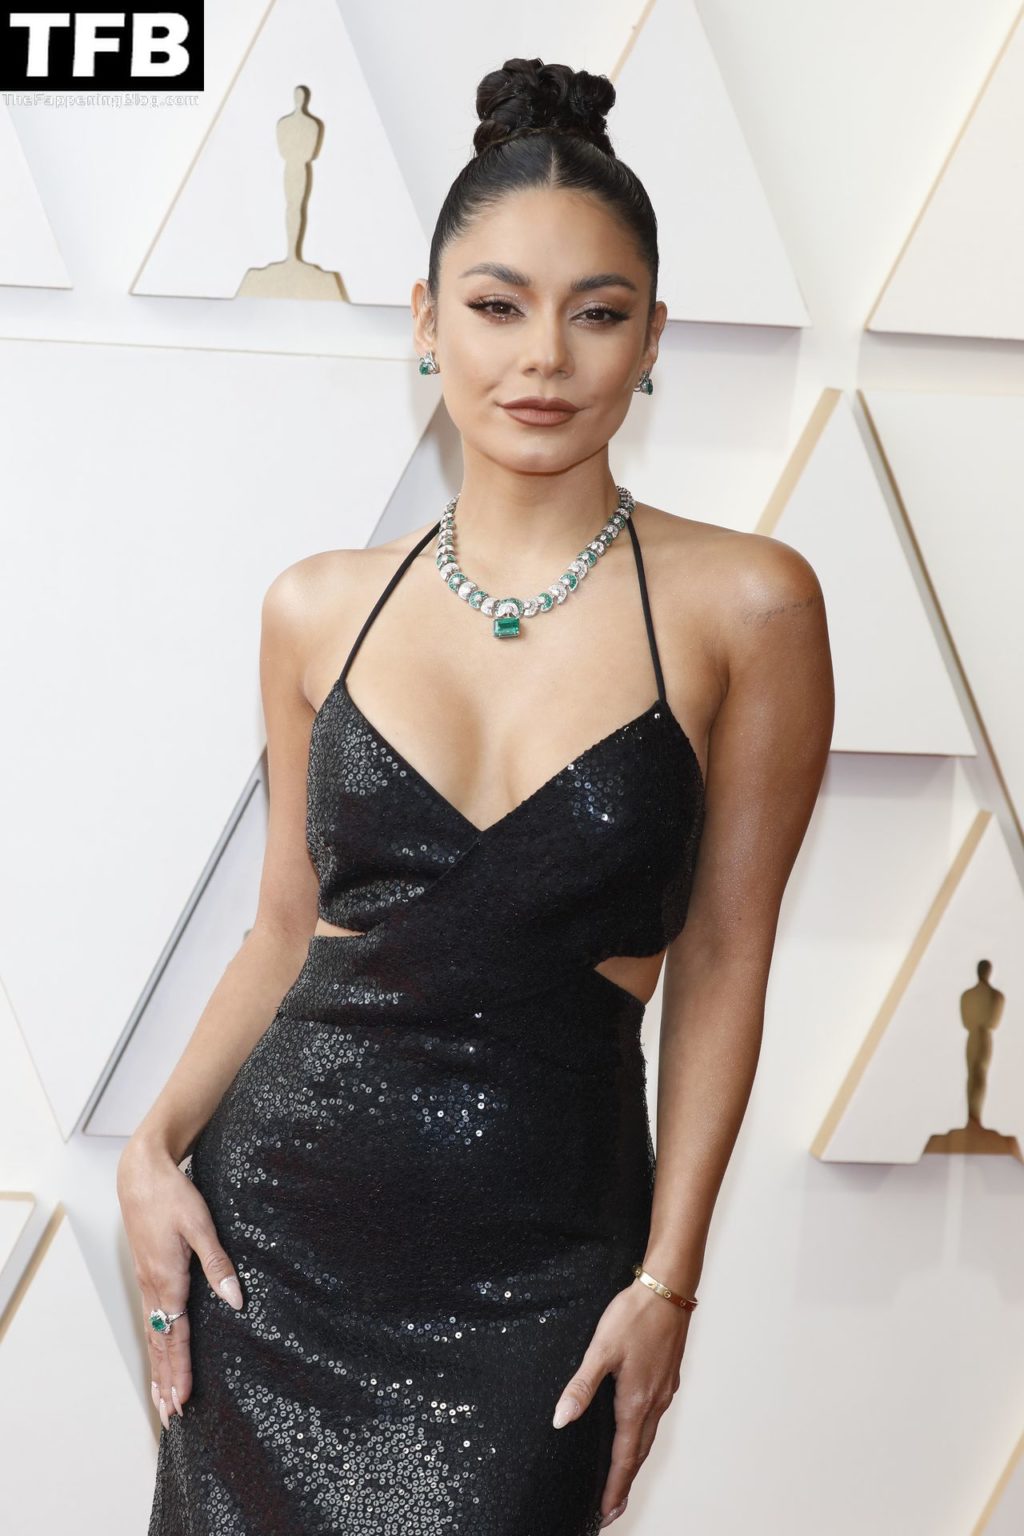 Vanessa Hudgens Sexy The Fappening Blog 76 2 1024x1536 - Vanessa Hudgens Poses on the Red Carpet at the 94th Annual Academy Awards (83 Photos)